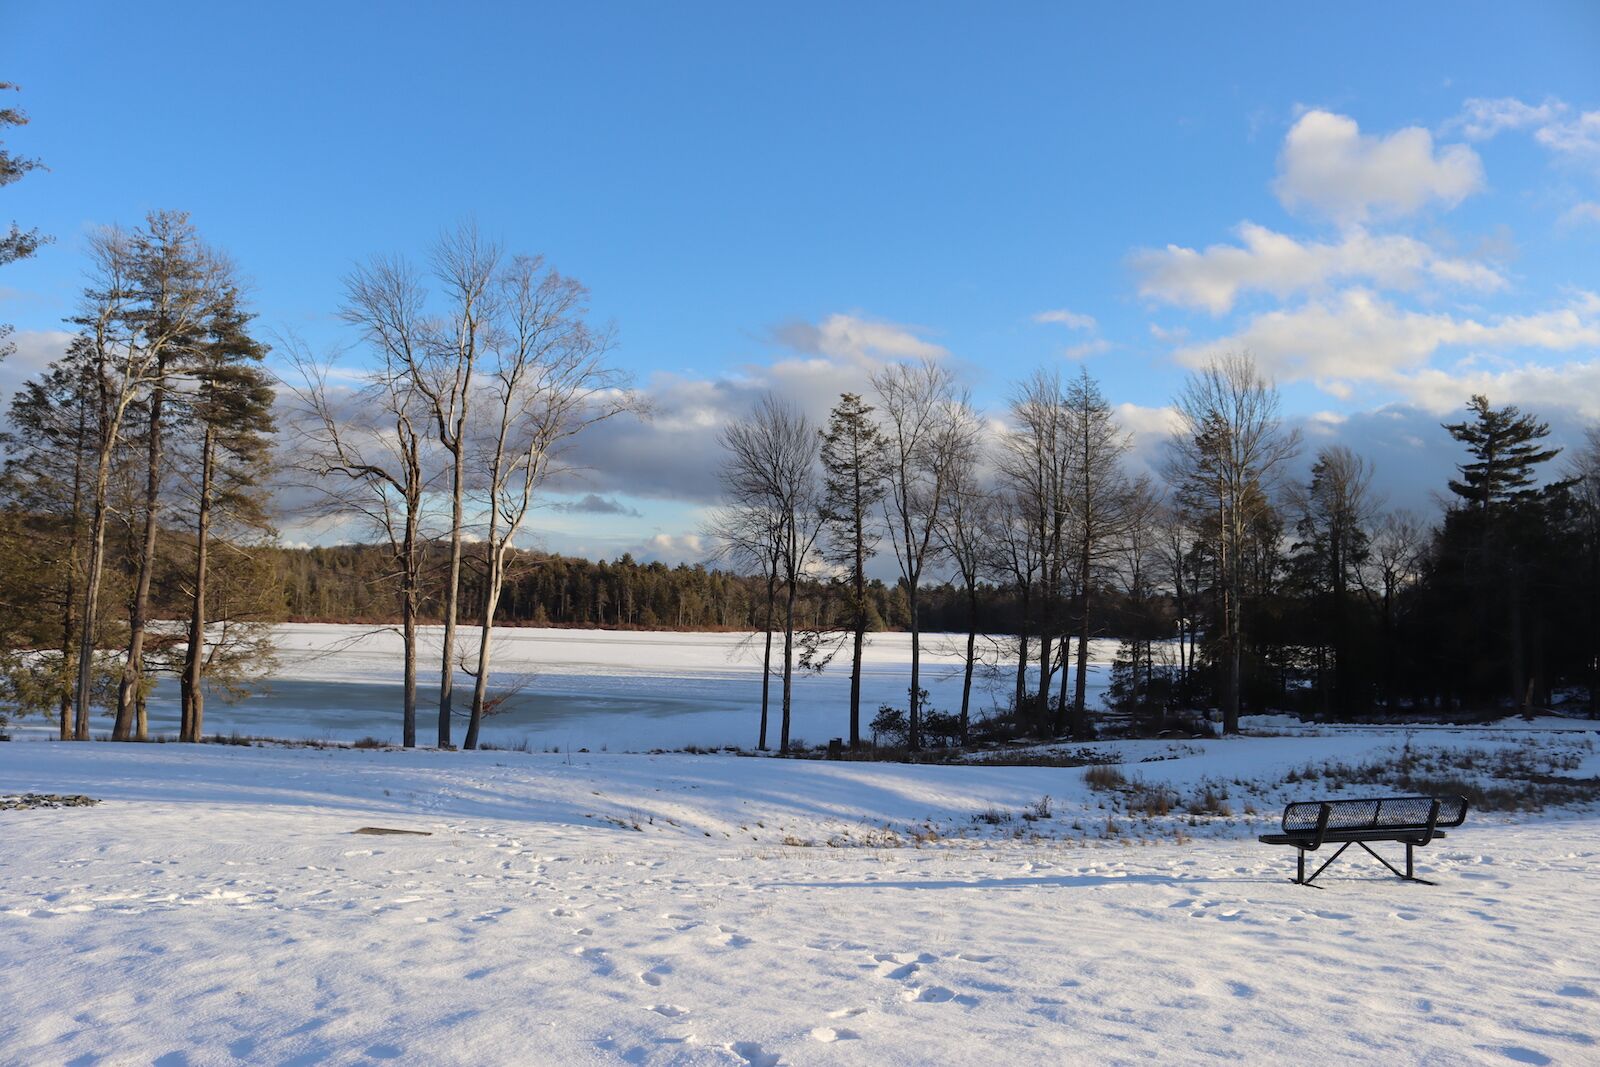 View of winter landscape at the The YO1 Health Resort in Monticello, NY